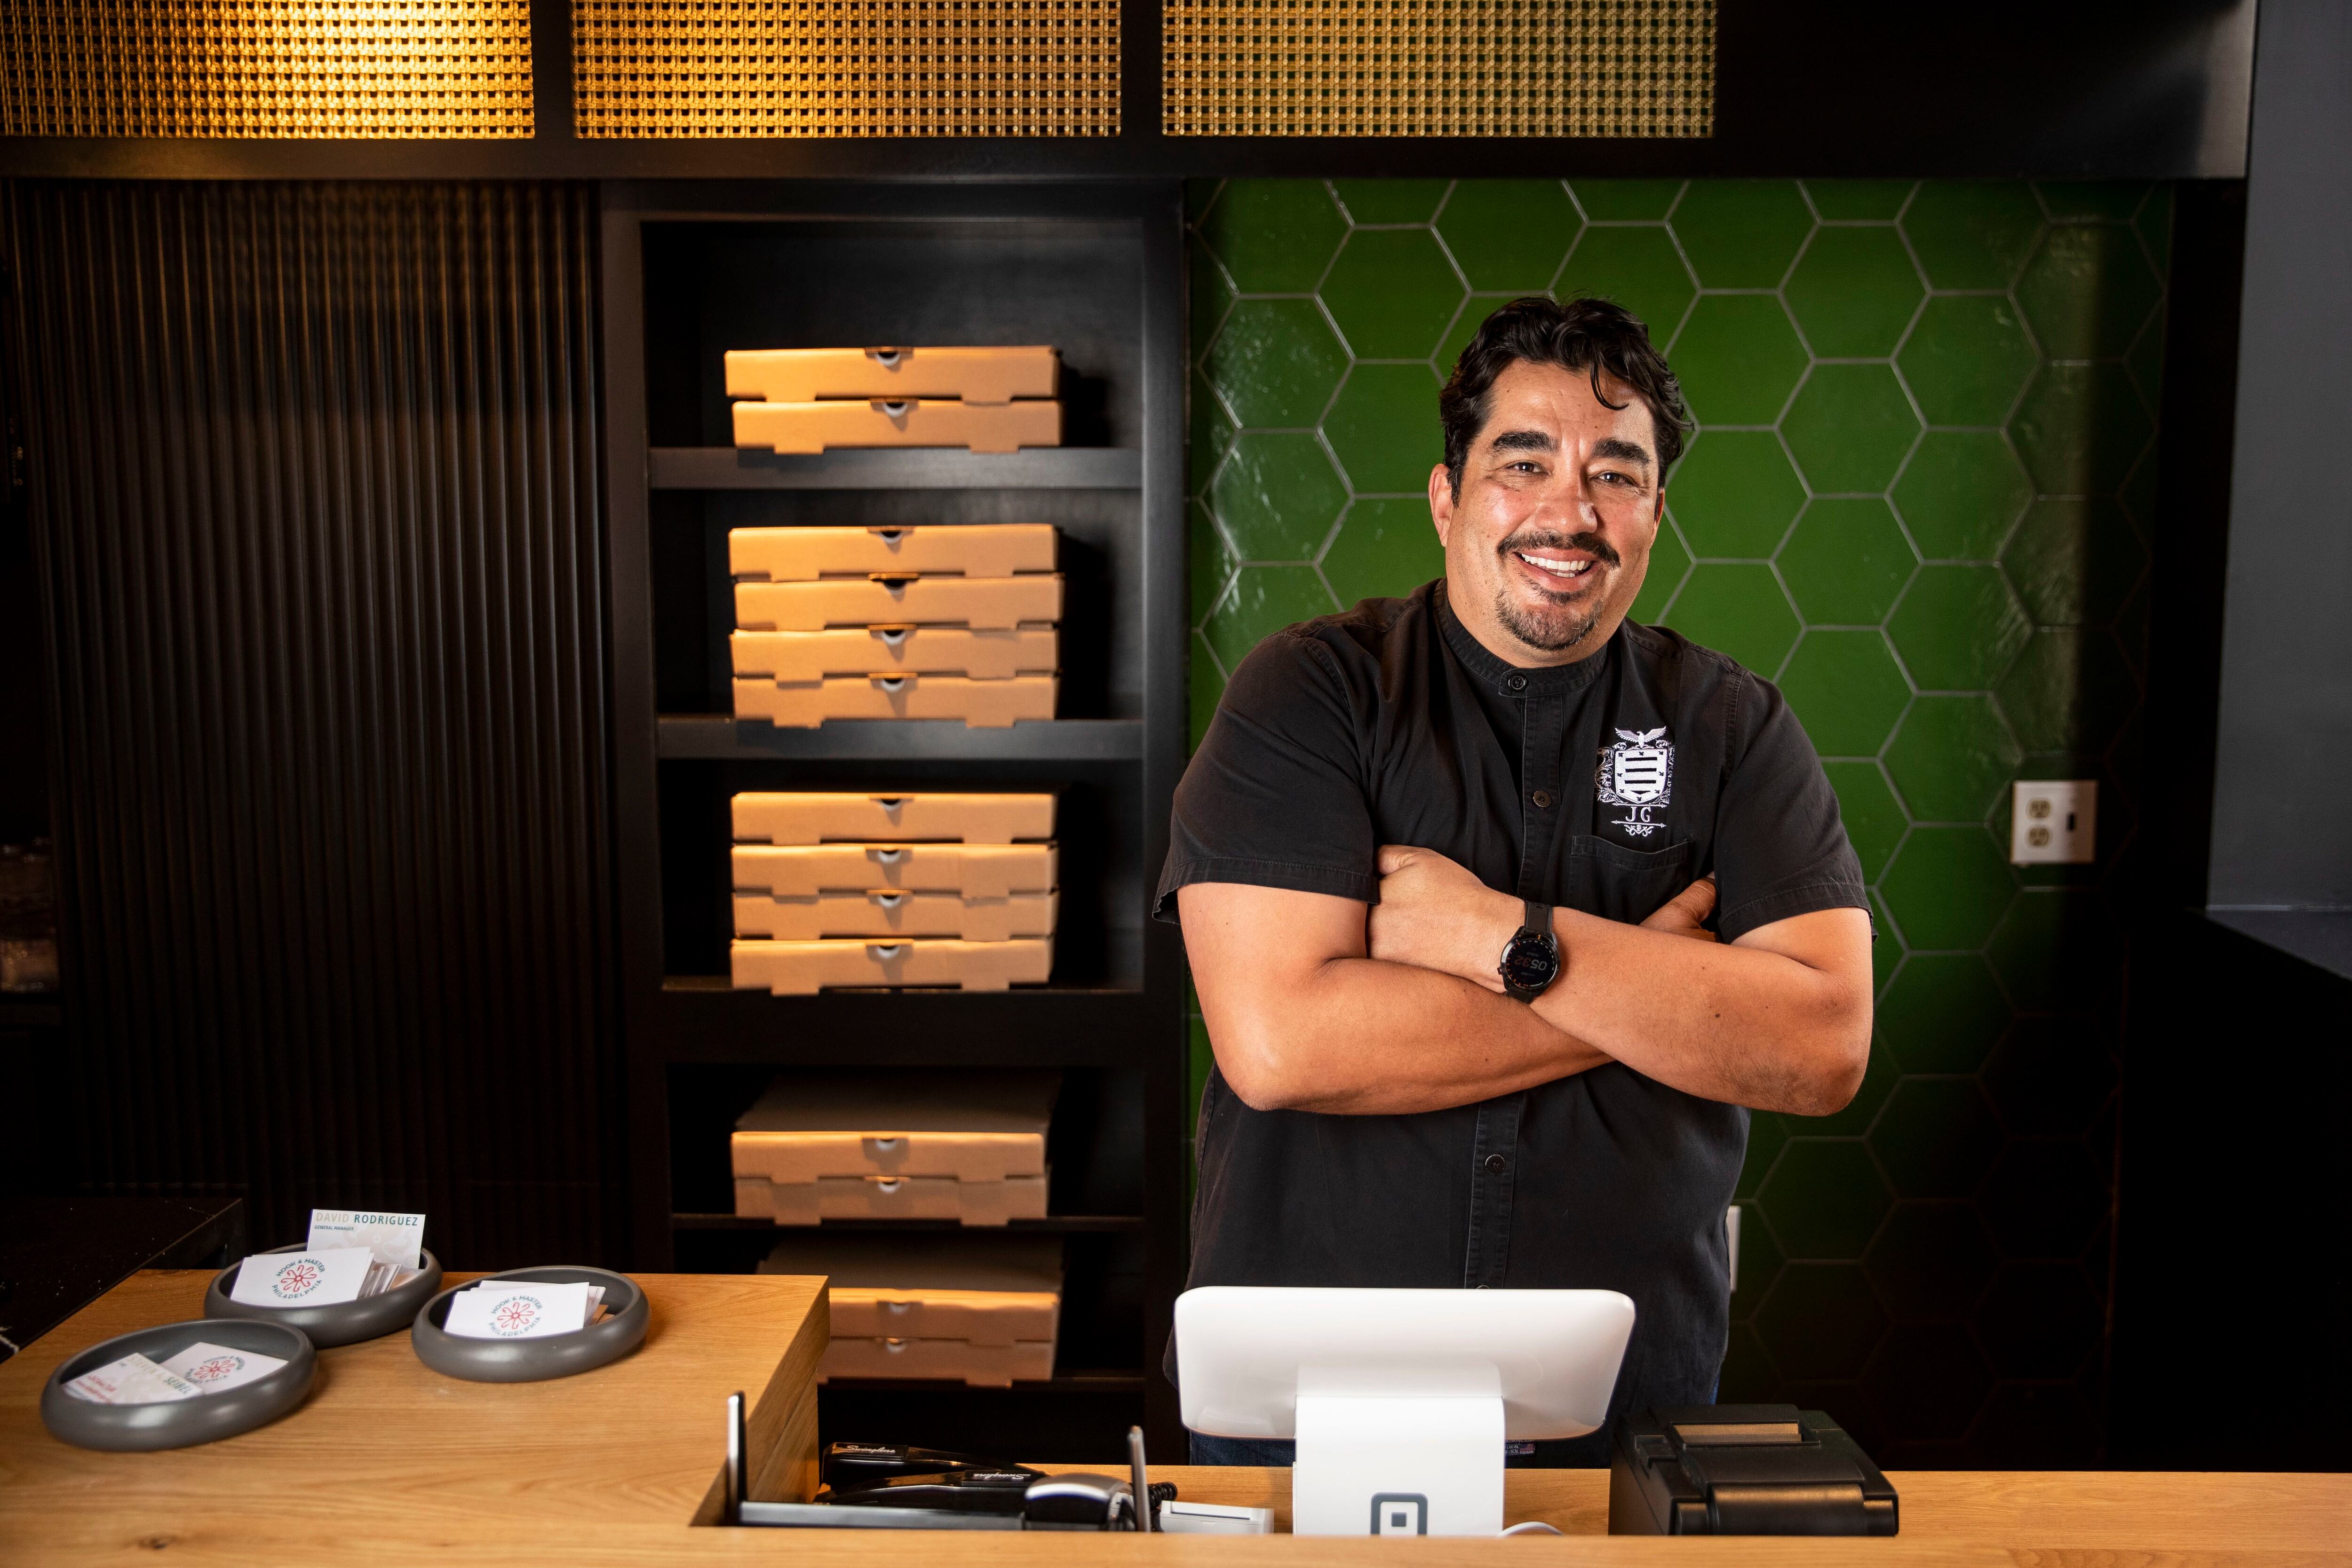 The New Wells Fargo Center Announces New Food And Beverage Offerings For  2022-2023 Season Including Brand-New Buena Onda Stand By Iron Chef Jose  Garces